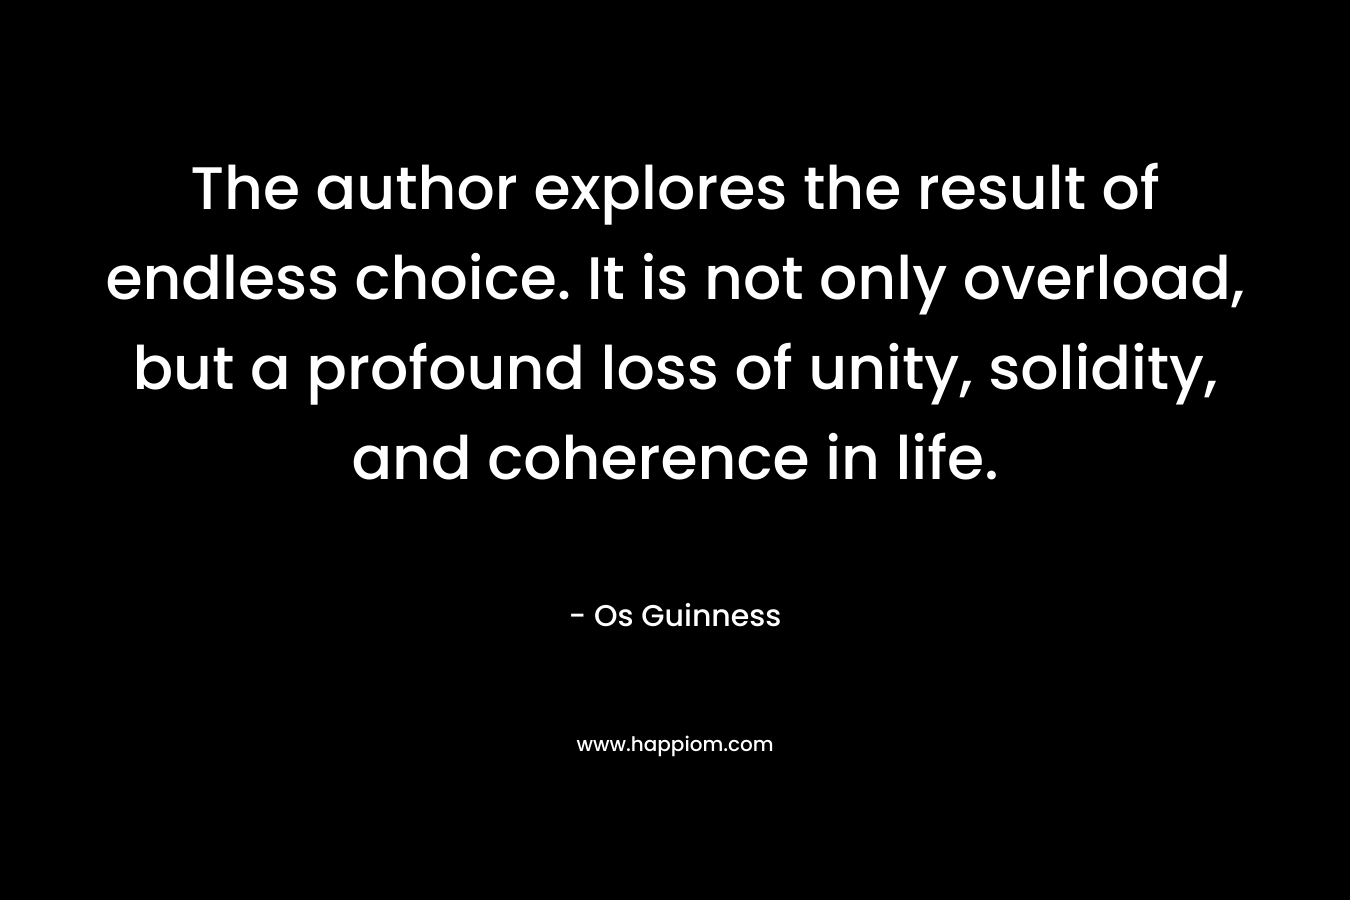 The author explores the result of endless choice. It is not only overload, but a profound loss of unity, solidity, and coherence in life.